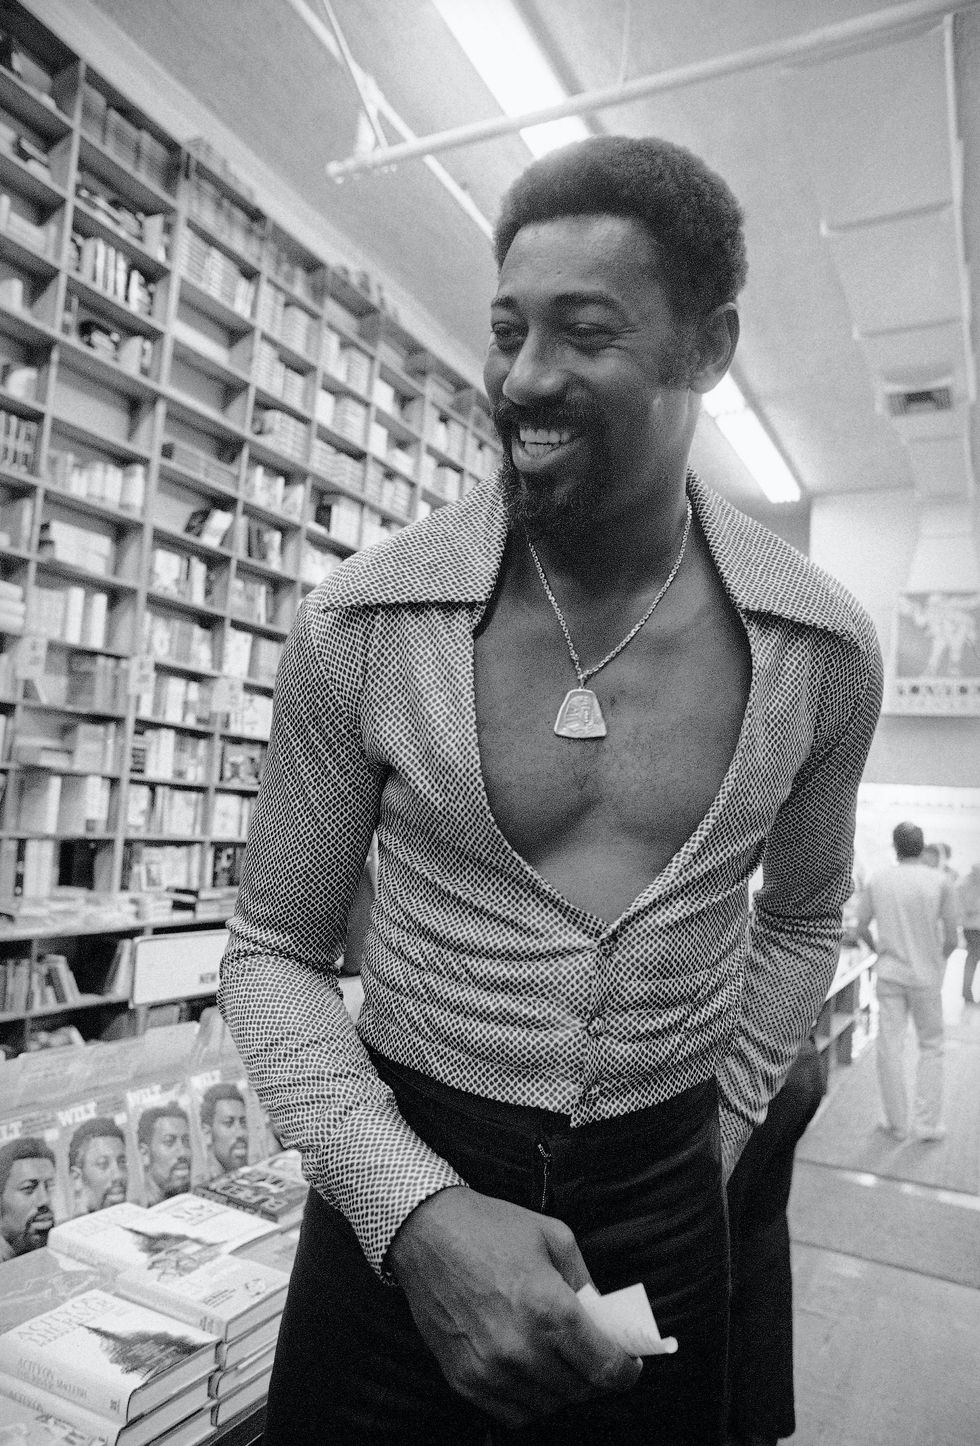 wilt chamberlain during a visit, tuesday, sept 18, 1973 in los angeles to a hollywood bookstore where his autobiography is on display, says he's talking with the san diego conquistadors of the american basketball association about a job as coach and player but refused to confirm or deny a story that he's on the verge of jumping from the los angeles lakers of the nba ap photowally fong